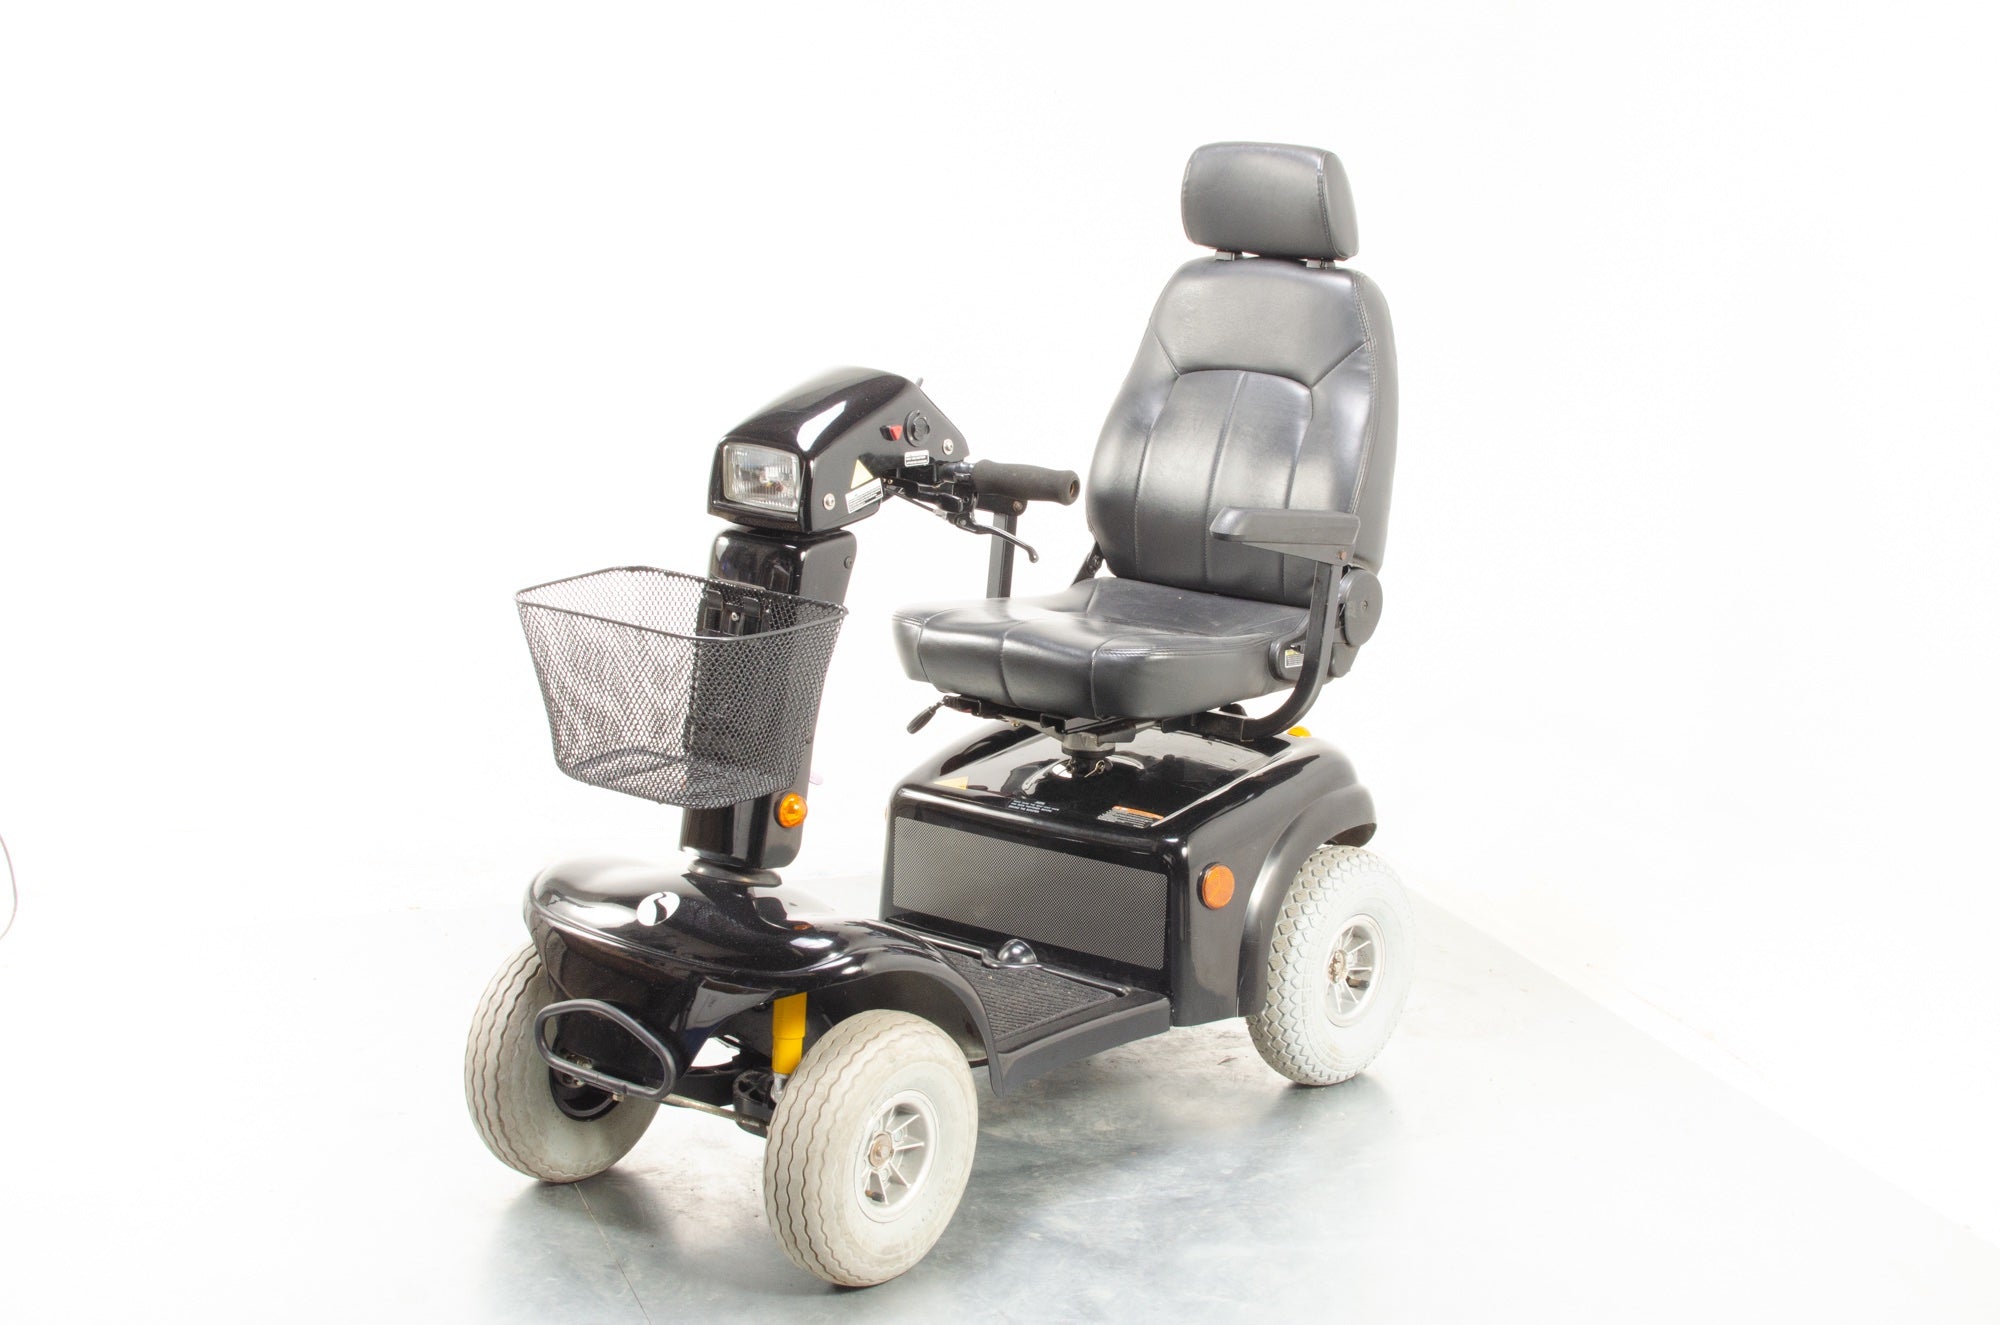 Rascal 850 Used Electric Mobility Scooter 8mph All-Terrain Pavement Suspension Pneumatic